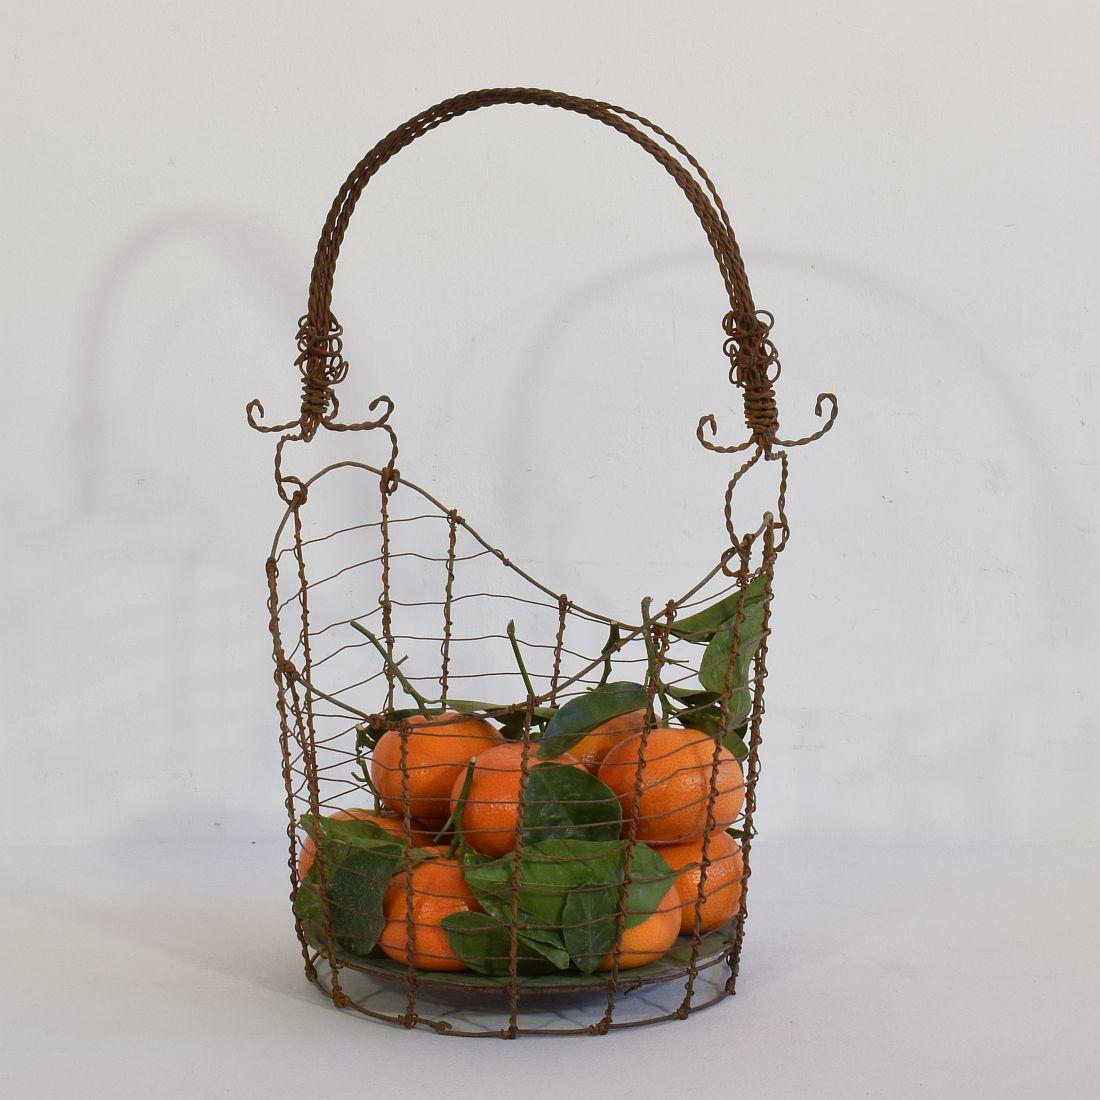 Wonderful and very rare wirework basket with a great form.
Iron and zinc,
Italy, circa 1850-1900
Weathered.